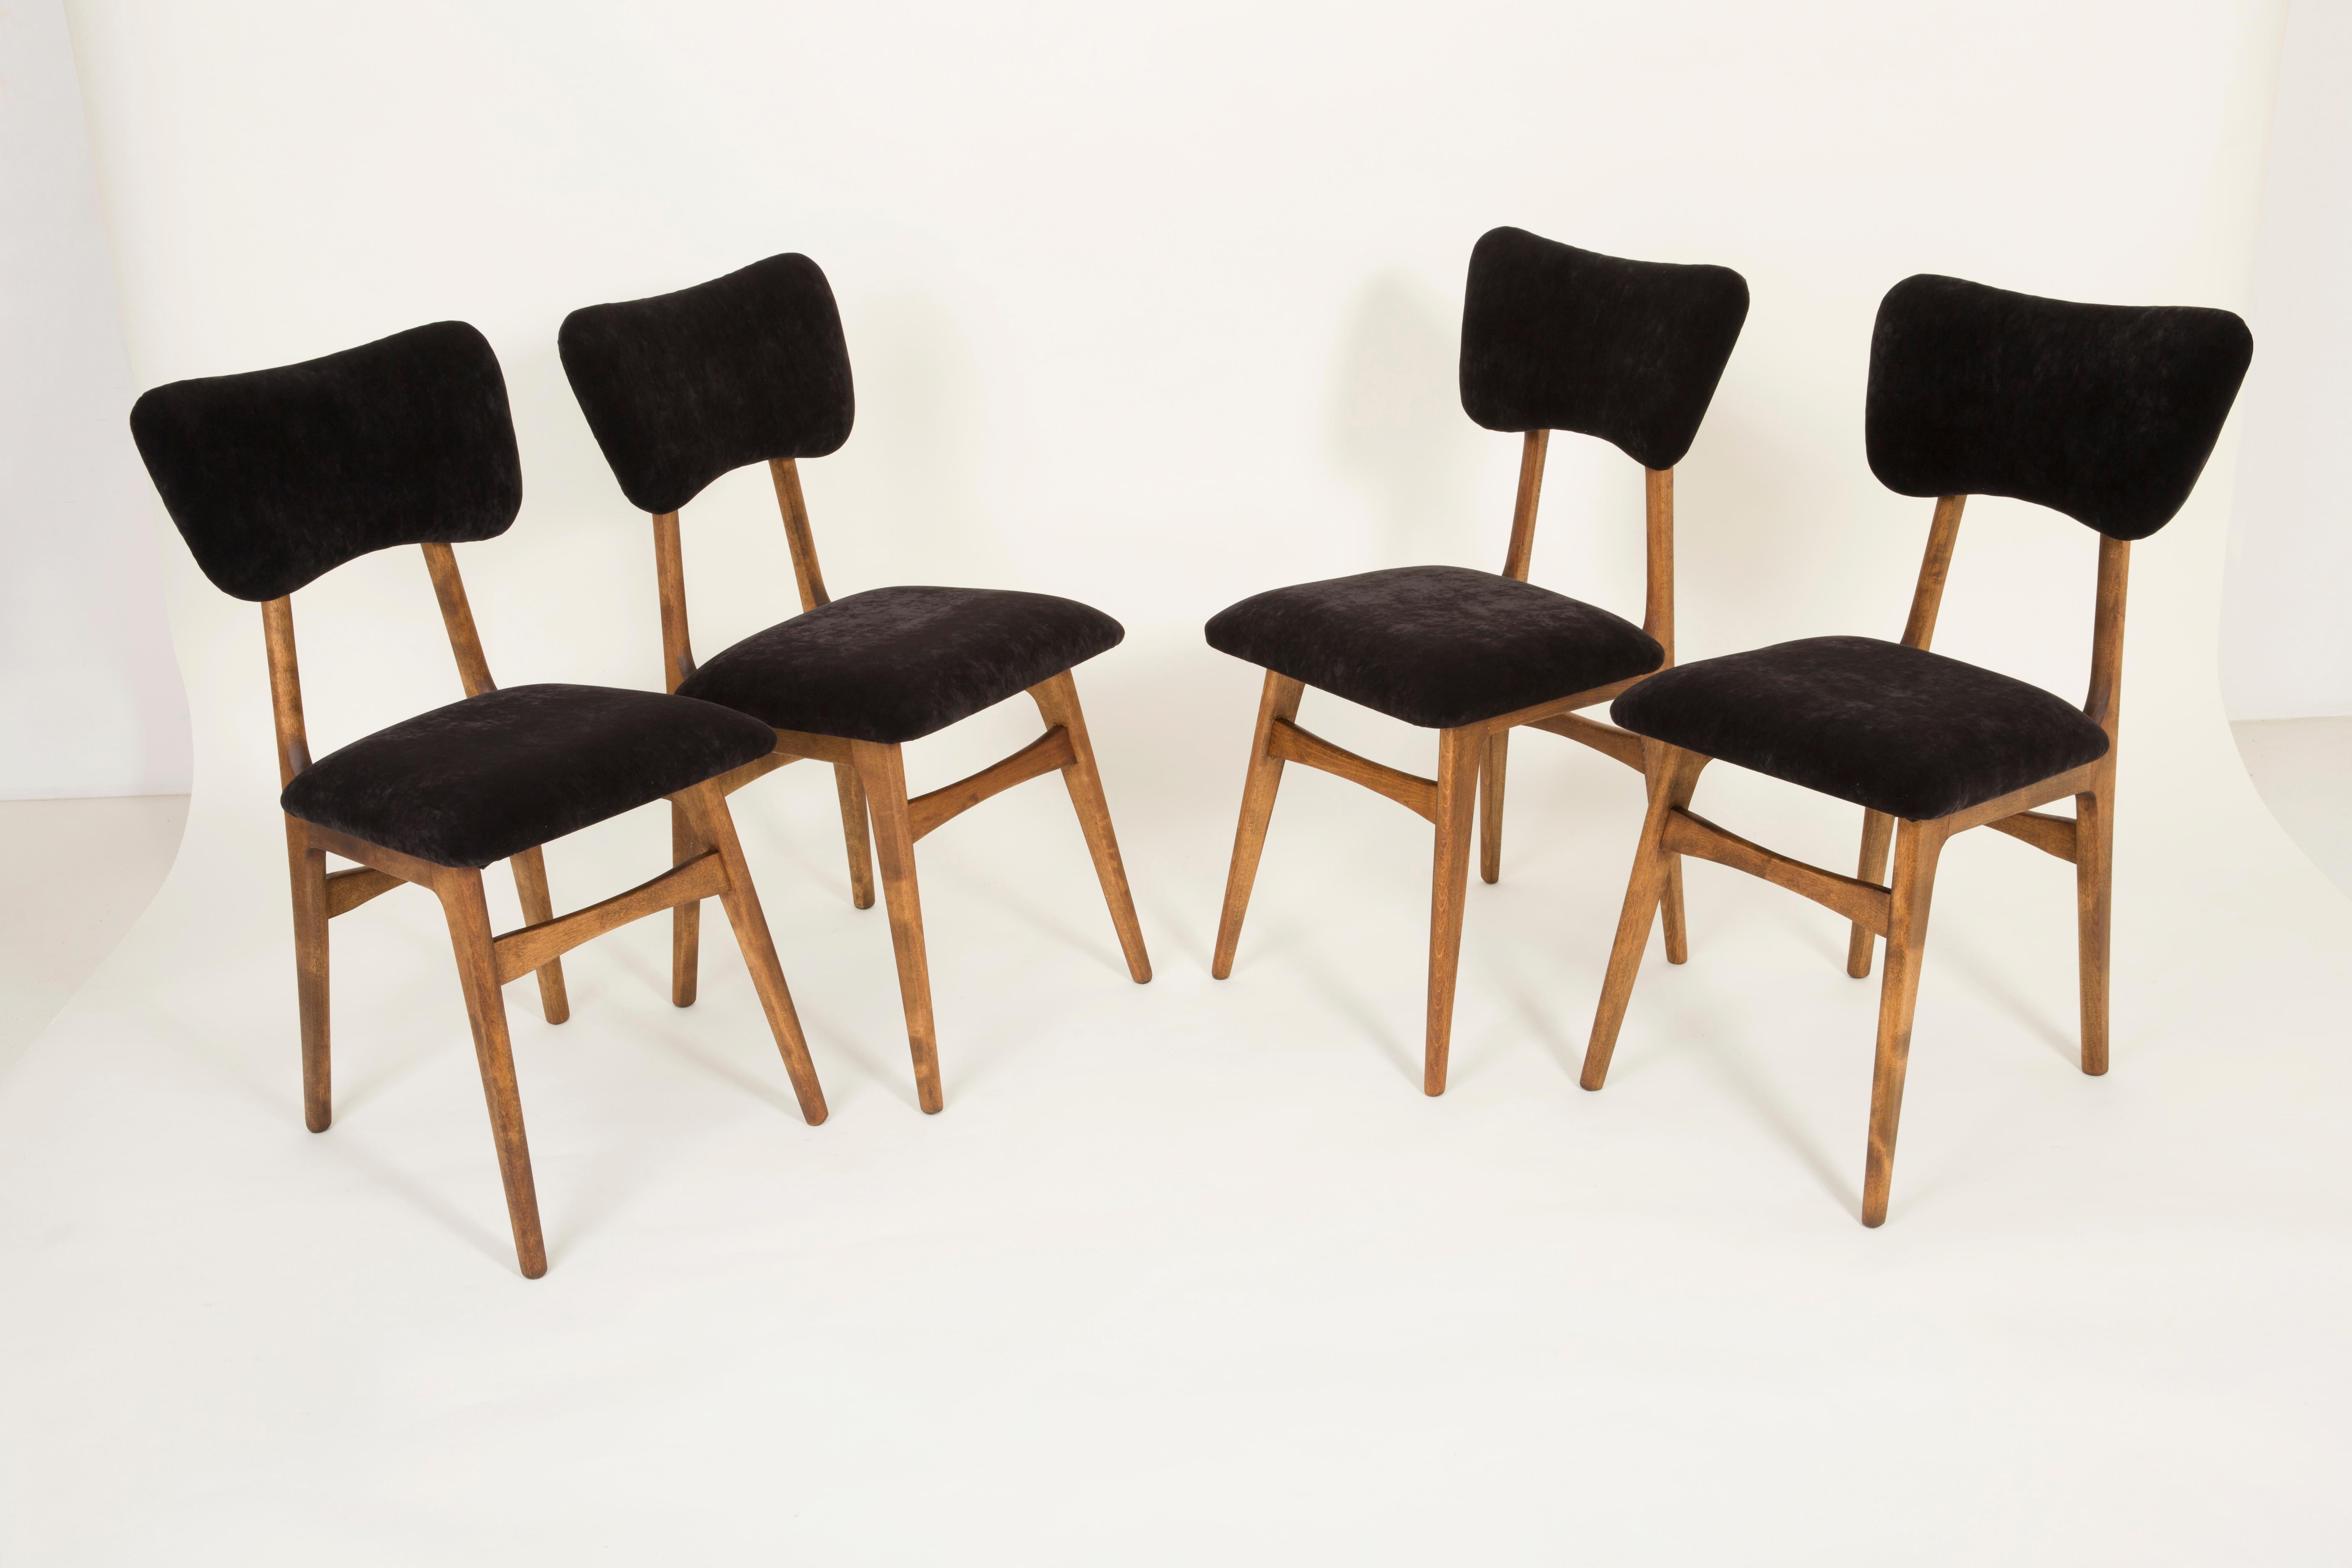 Set of Six 20th Century Black Velvet Chairs, Europe, 1960s For Sale 3